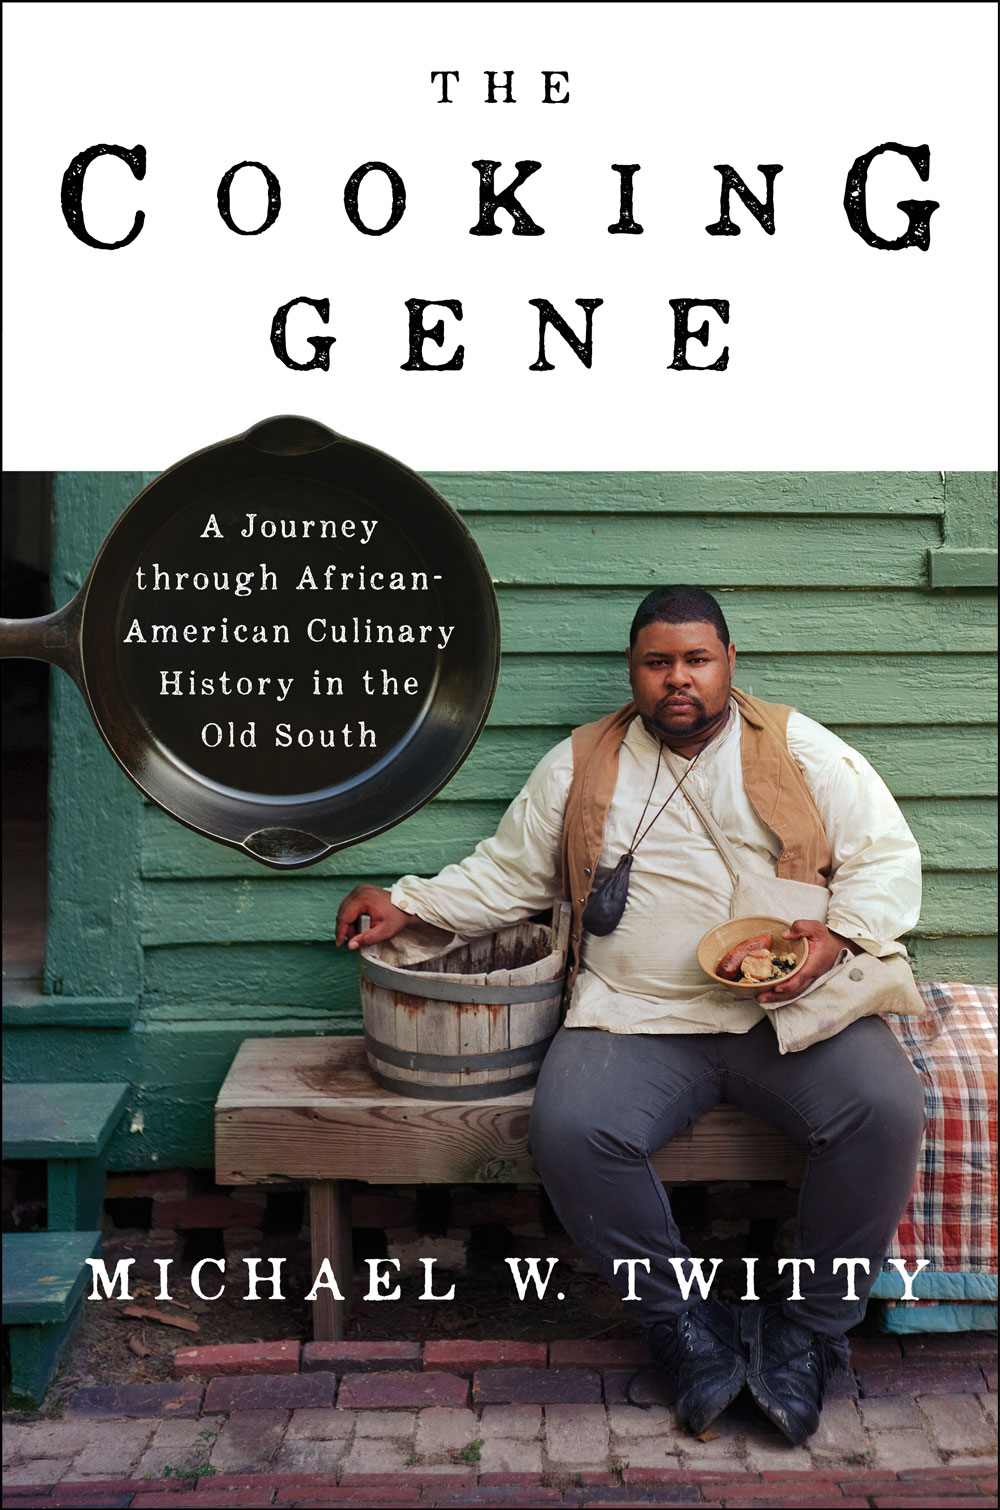 Cover for Michael Twitty's book, "The Cooking Gene"